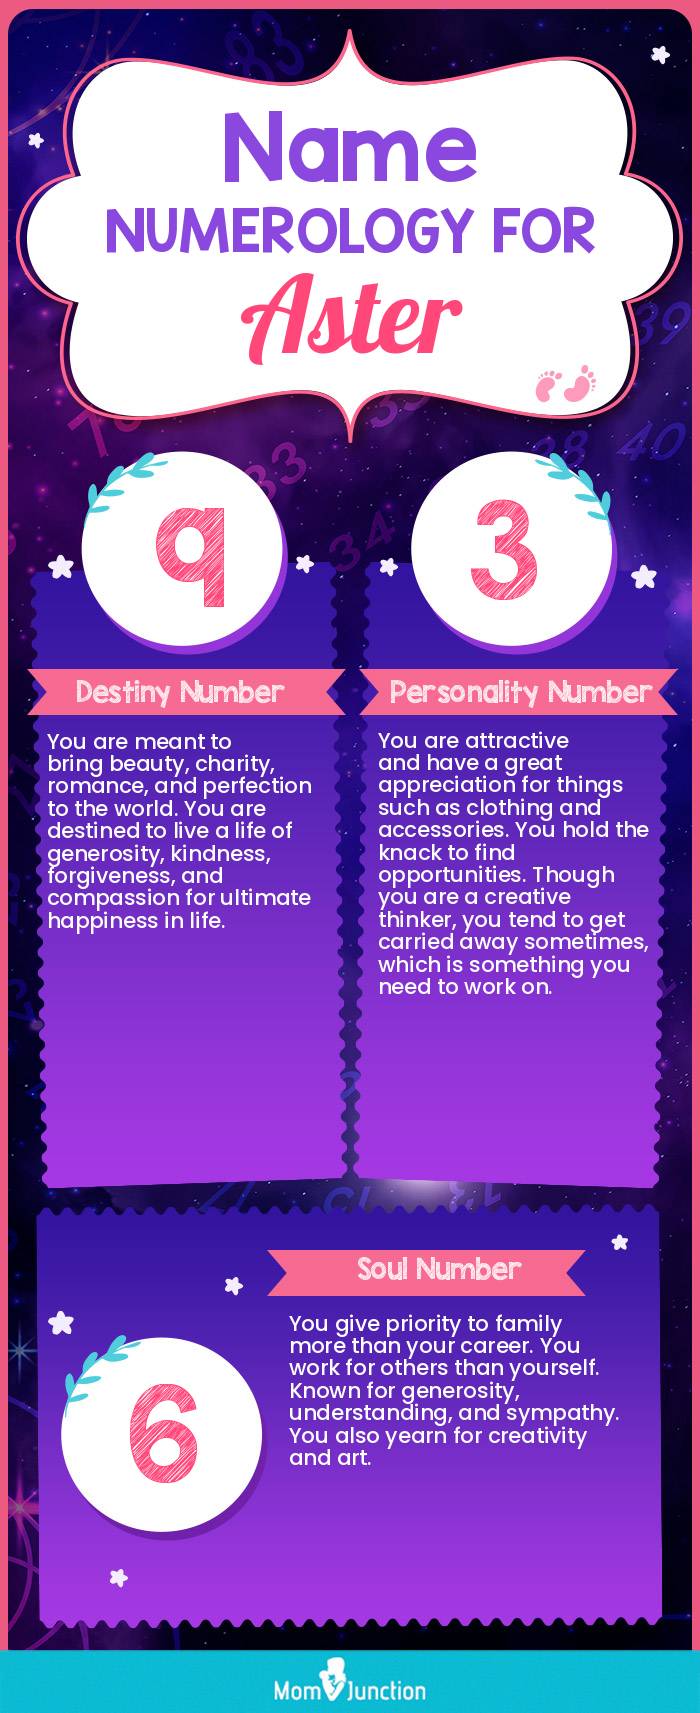 name-numerology-for-aster-girl